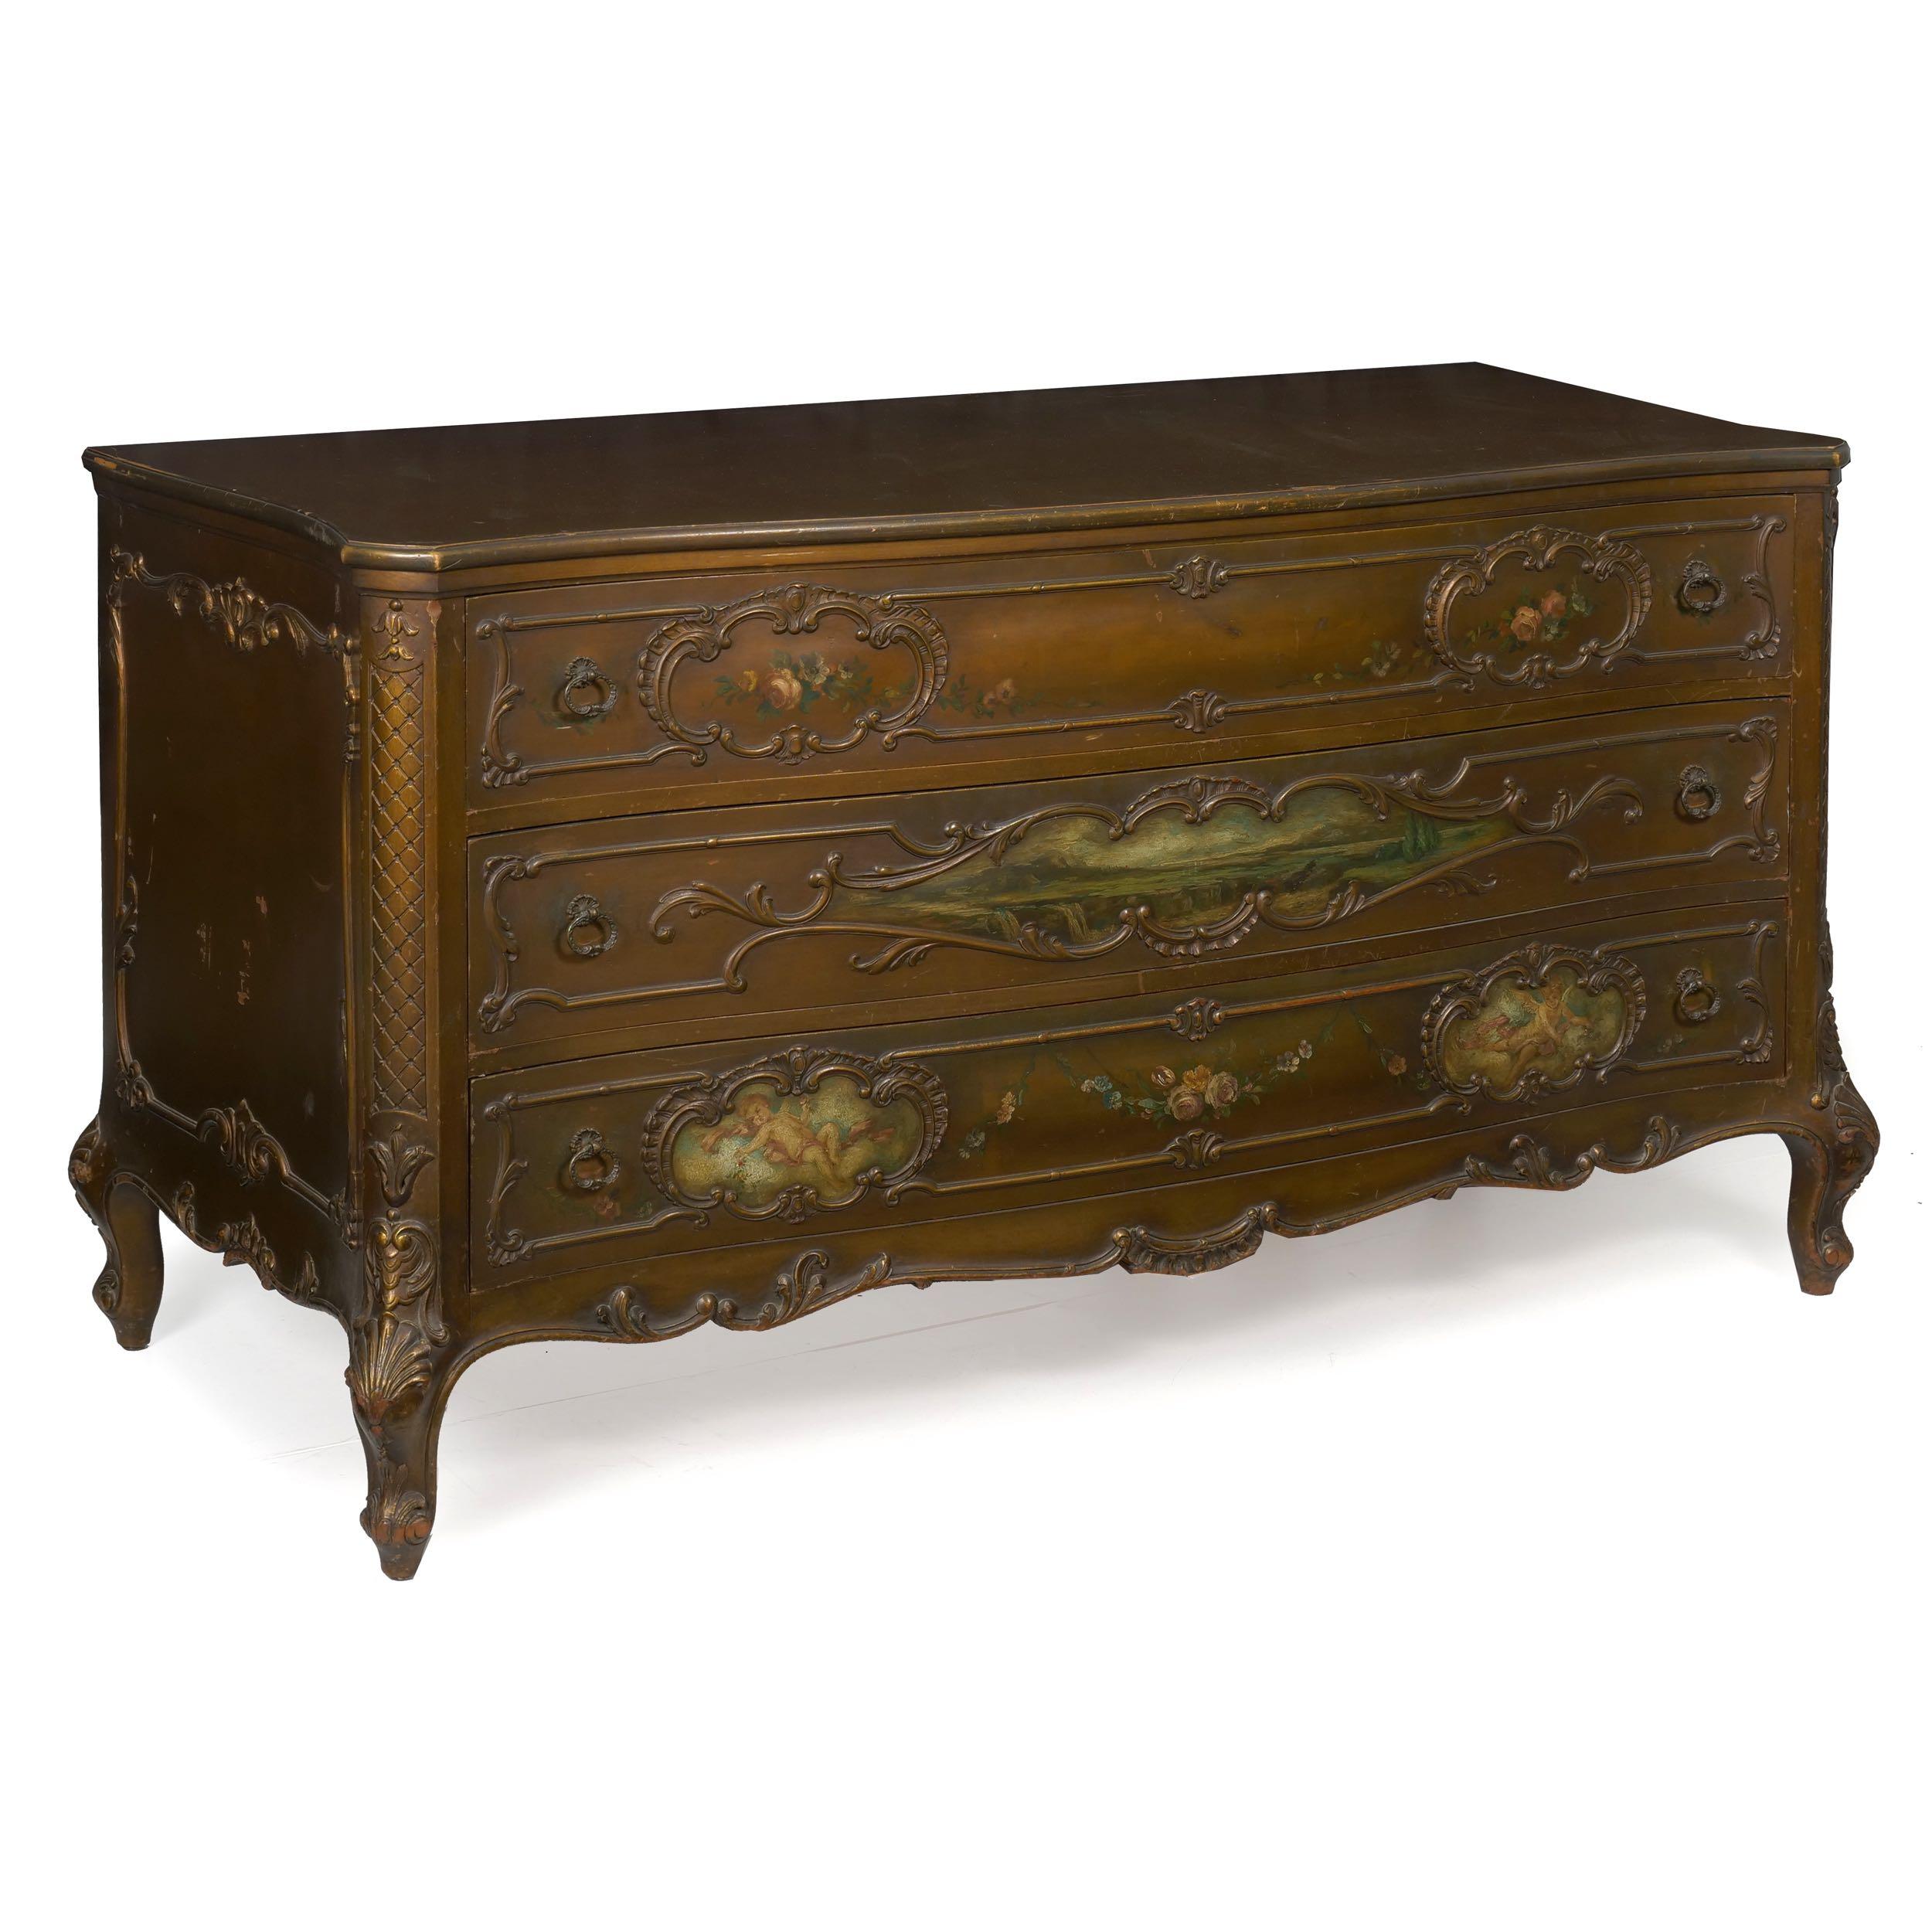 French Rococo Revival commode with painted panels
circa first half of the 20th century, unmarked
Item # 007WFV30K 

An attractive commode from the first half of the 20th century, the case features a warm brown painted surface that is likely original